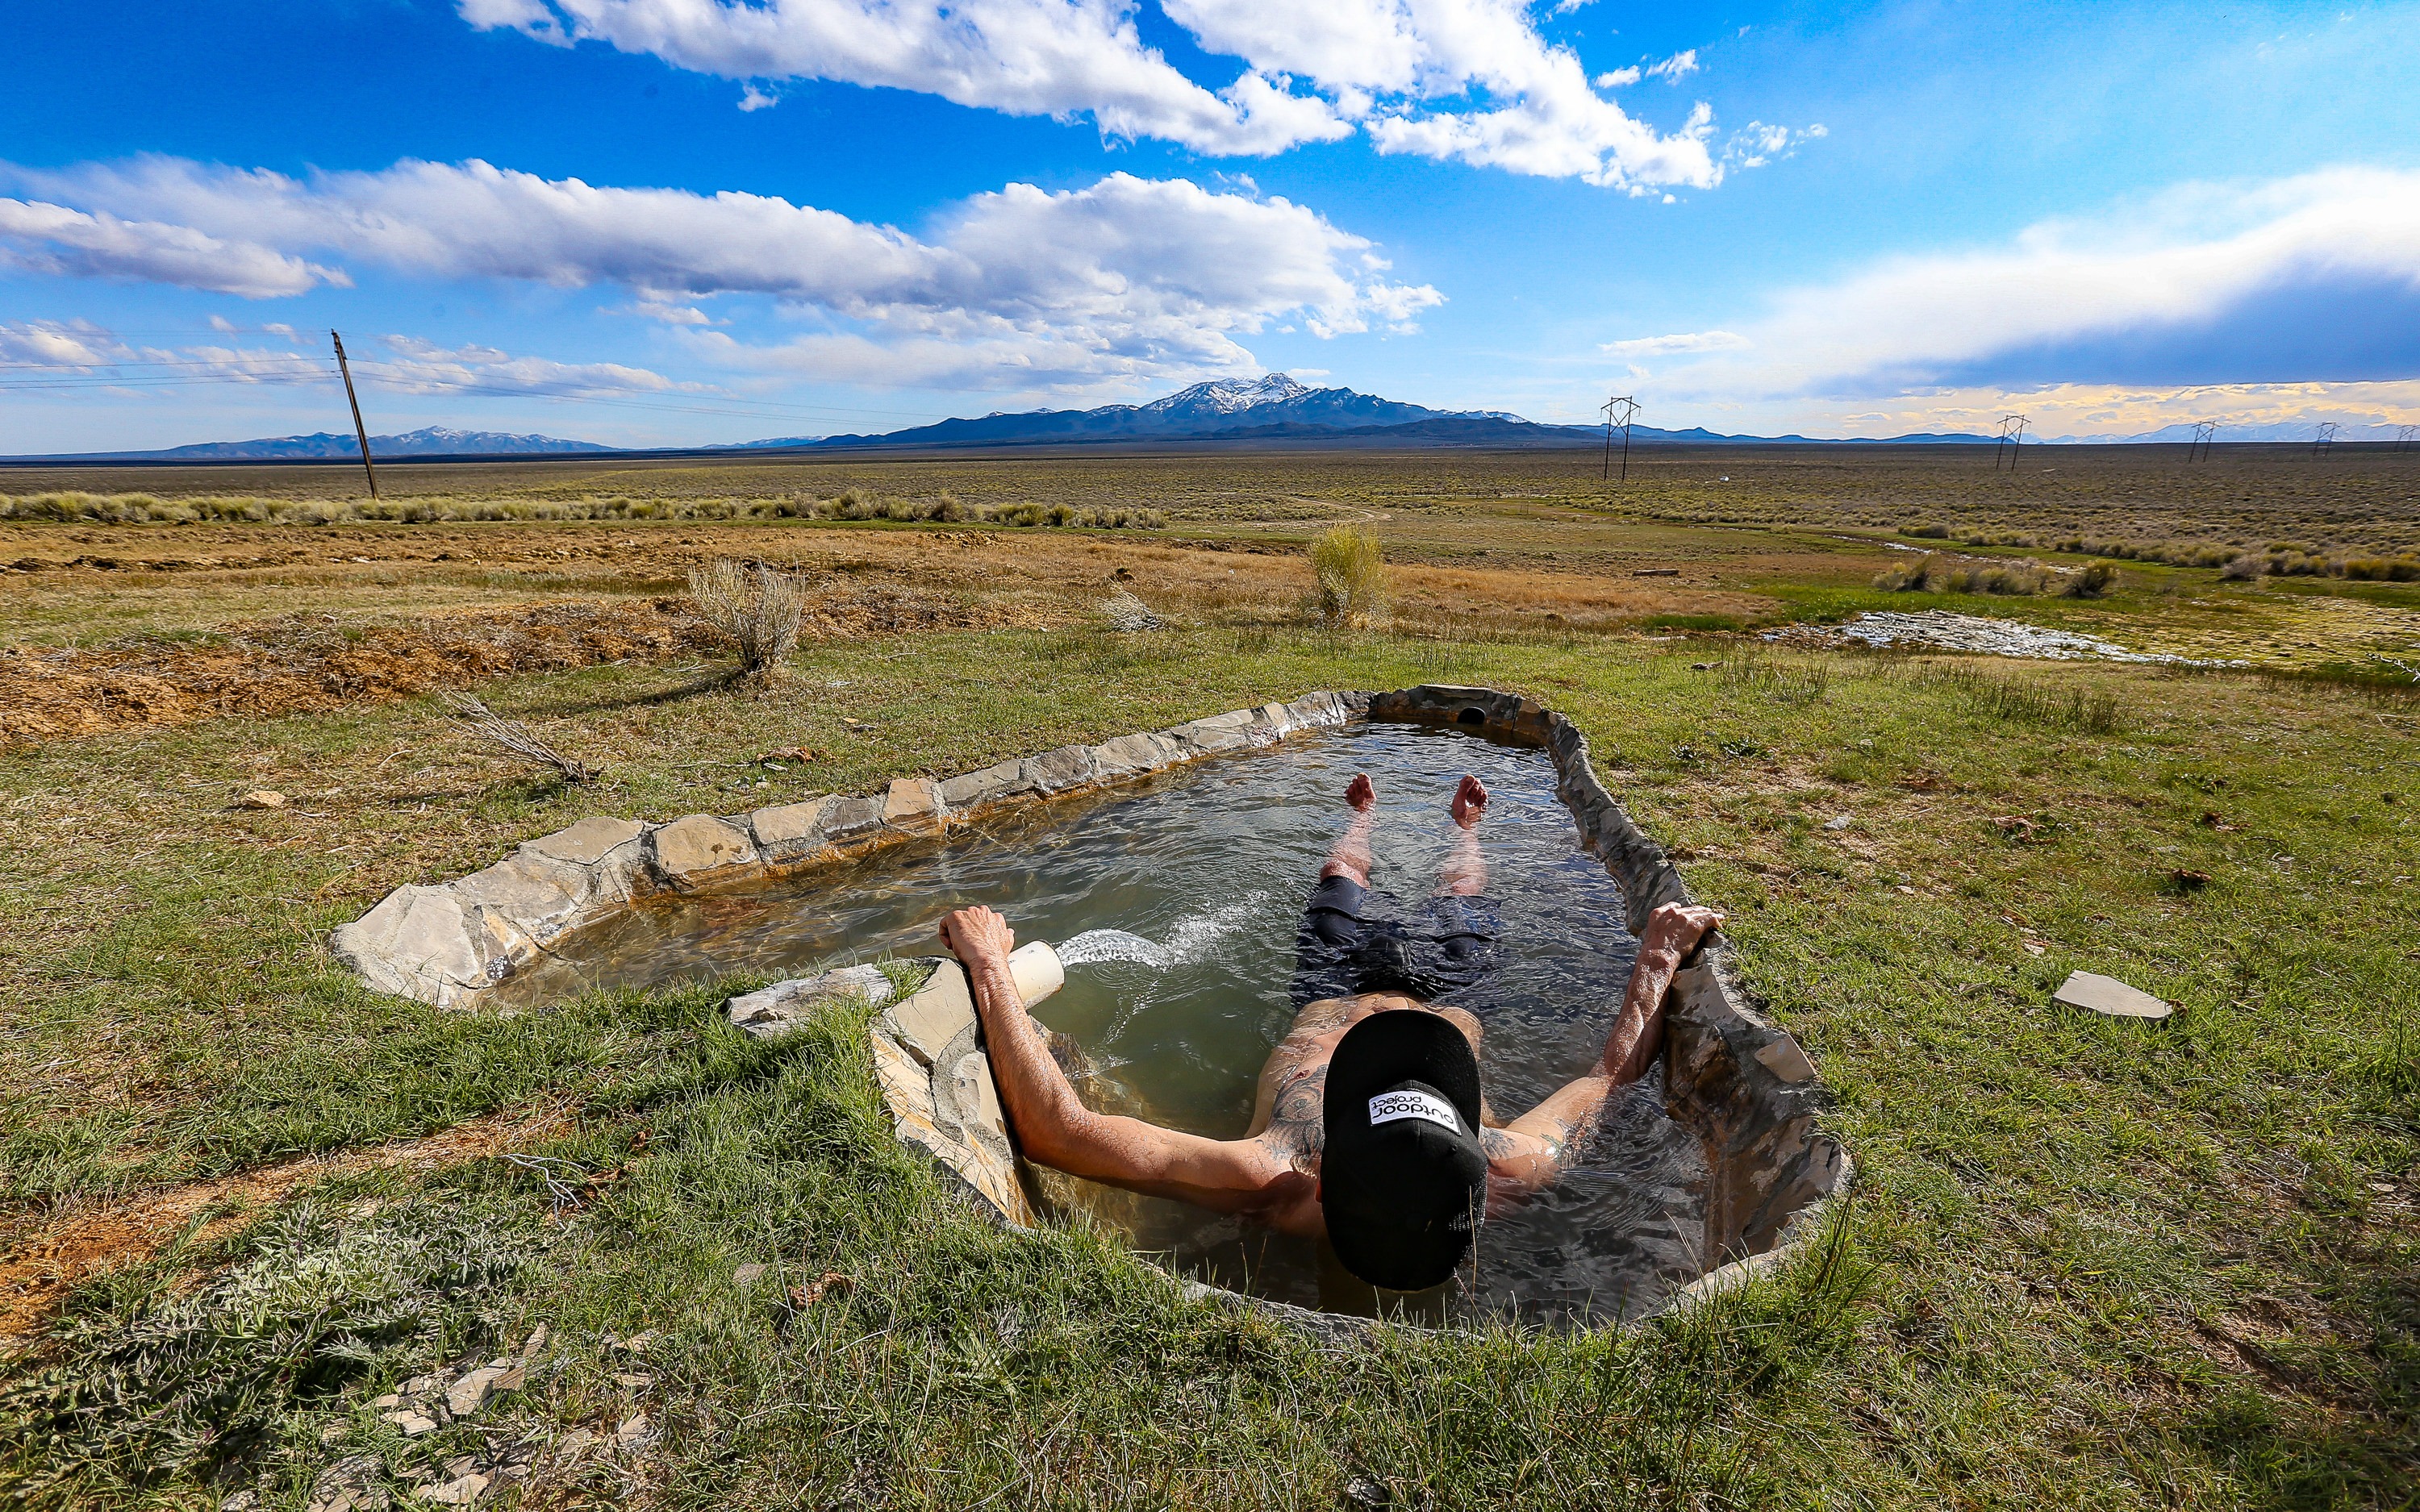 Nudist Adventure - The Naked Truth About Hot Springs | Outdoor Project